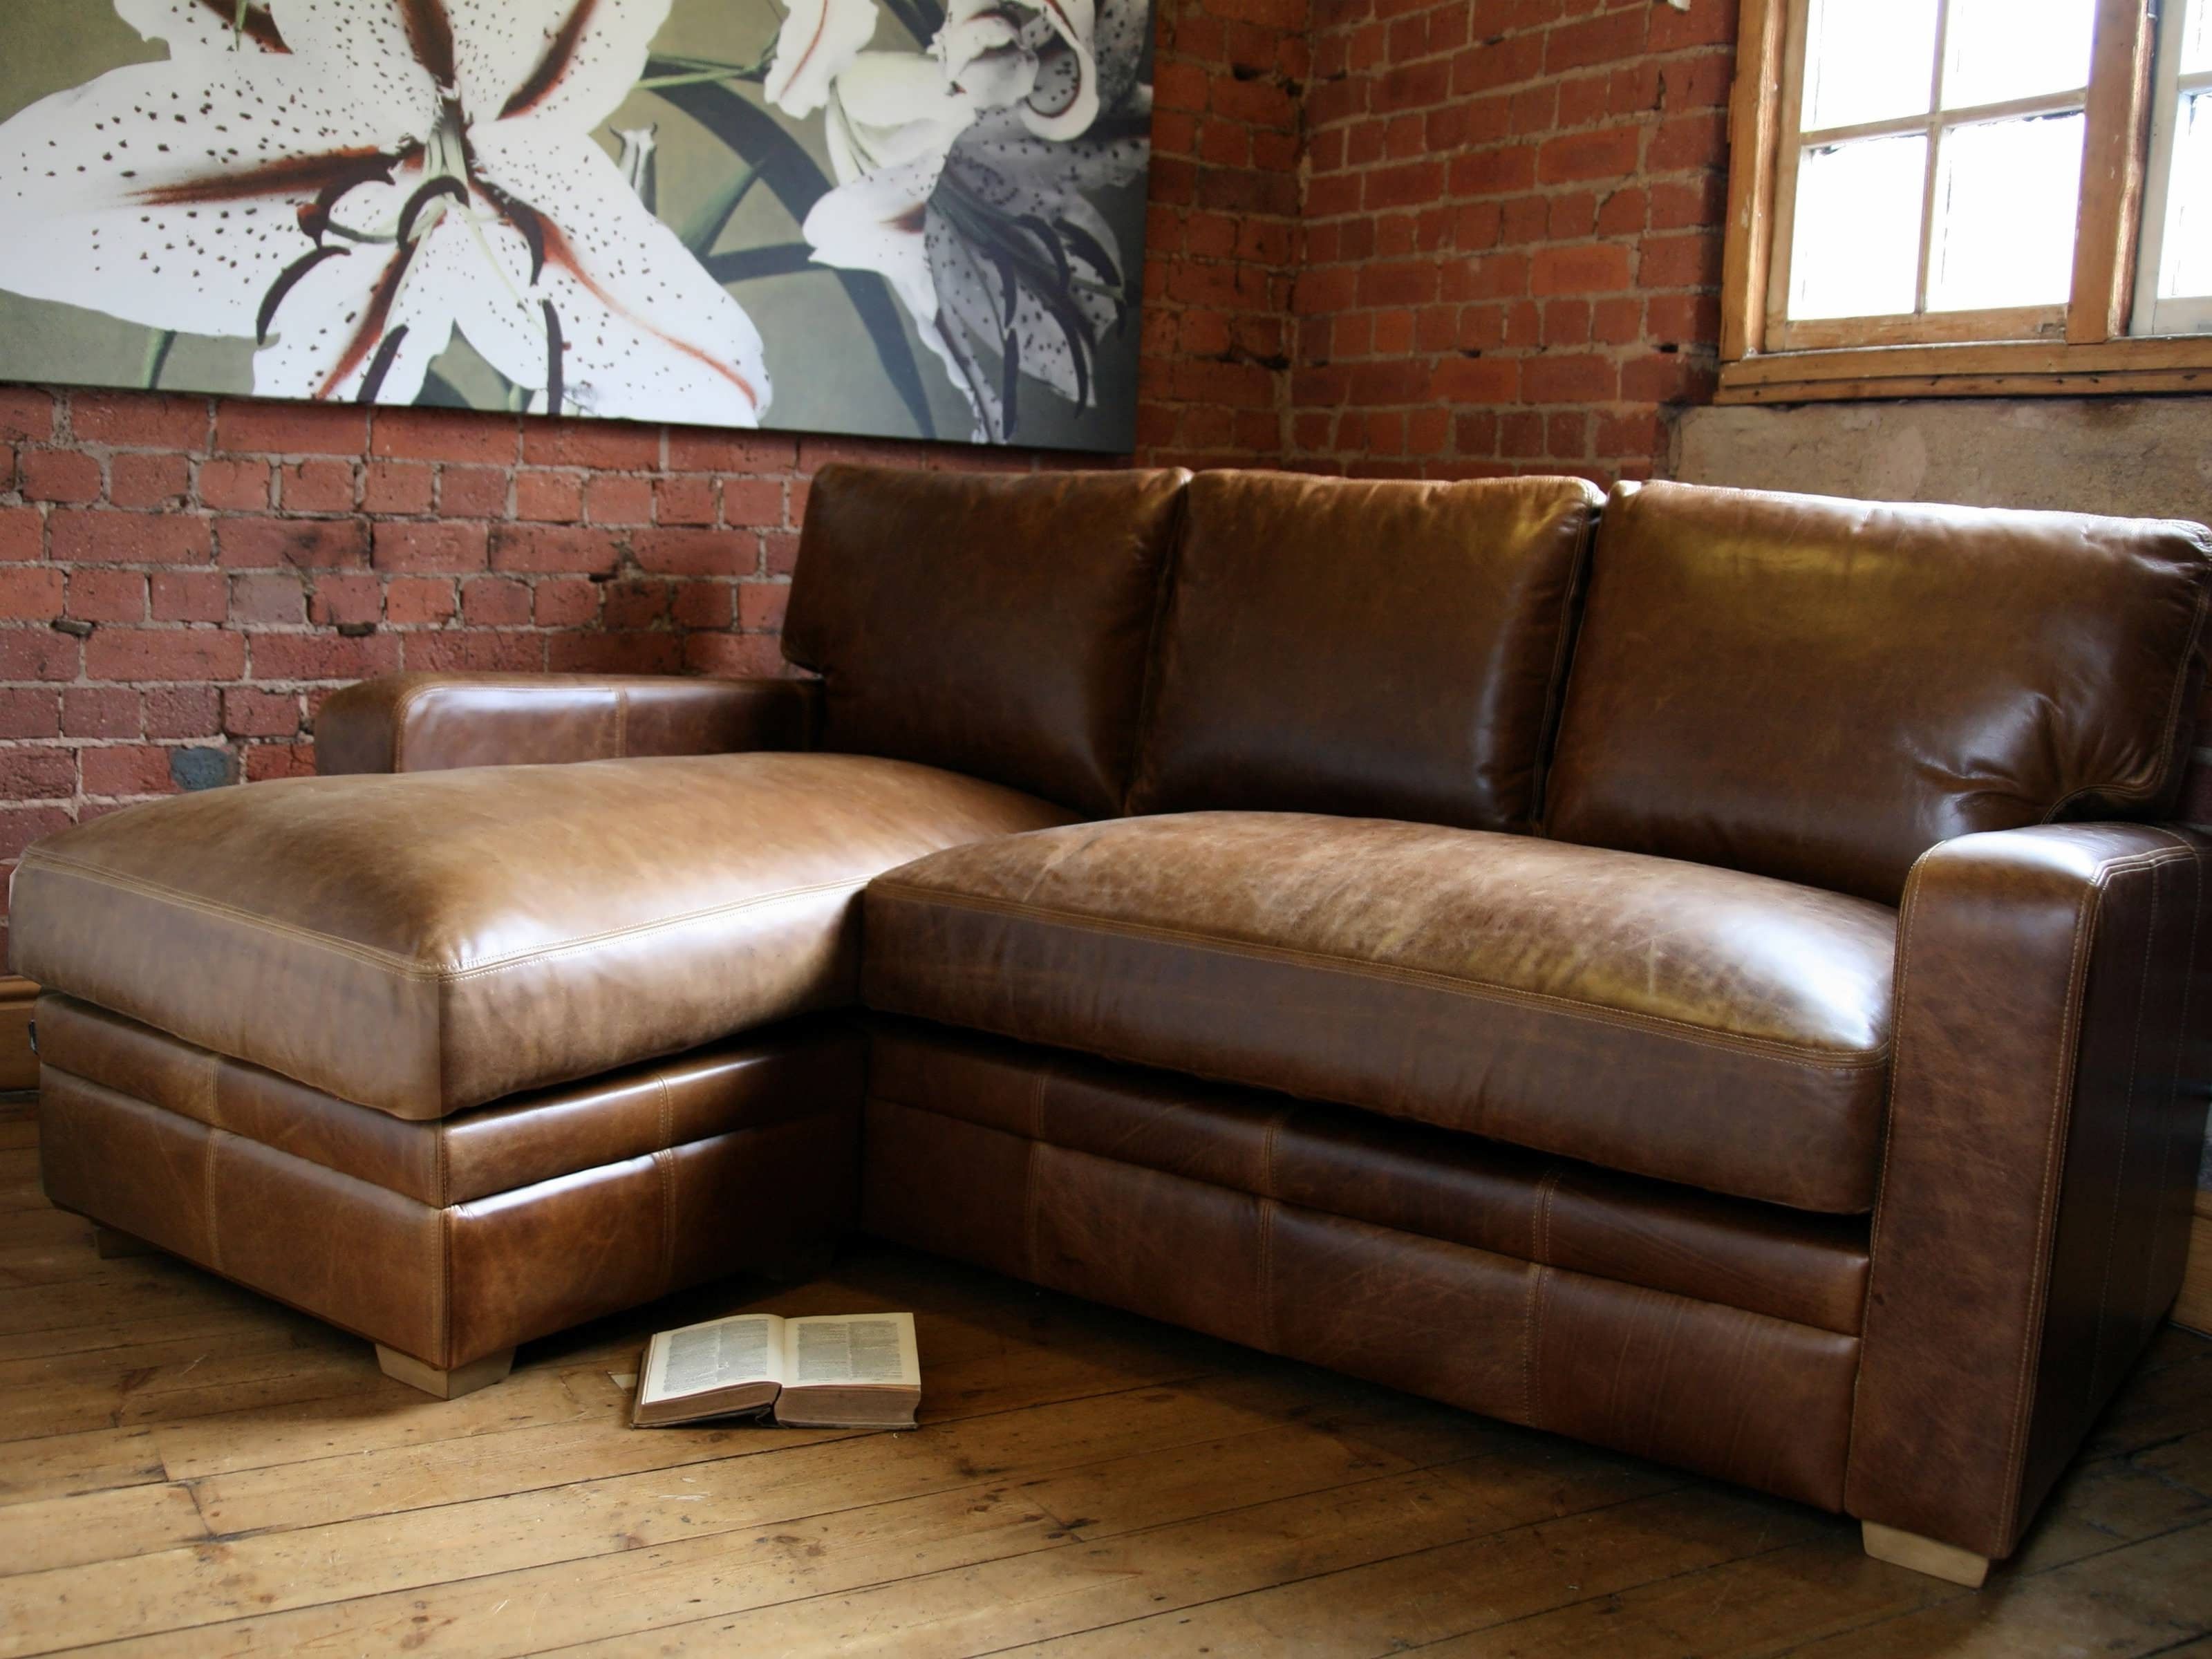 leather sectional sofa with chaise lounge